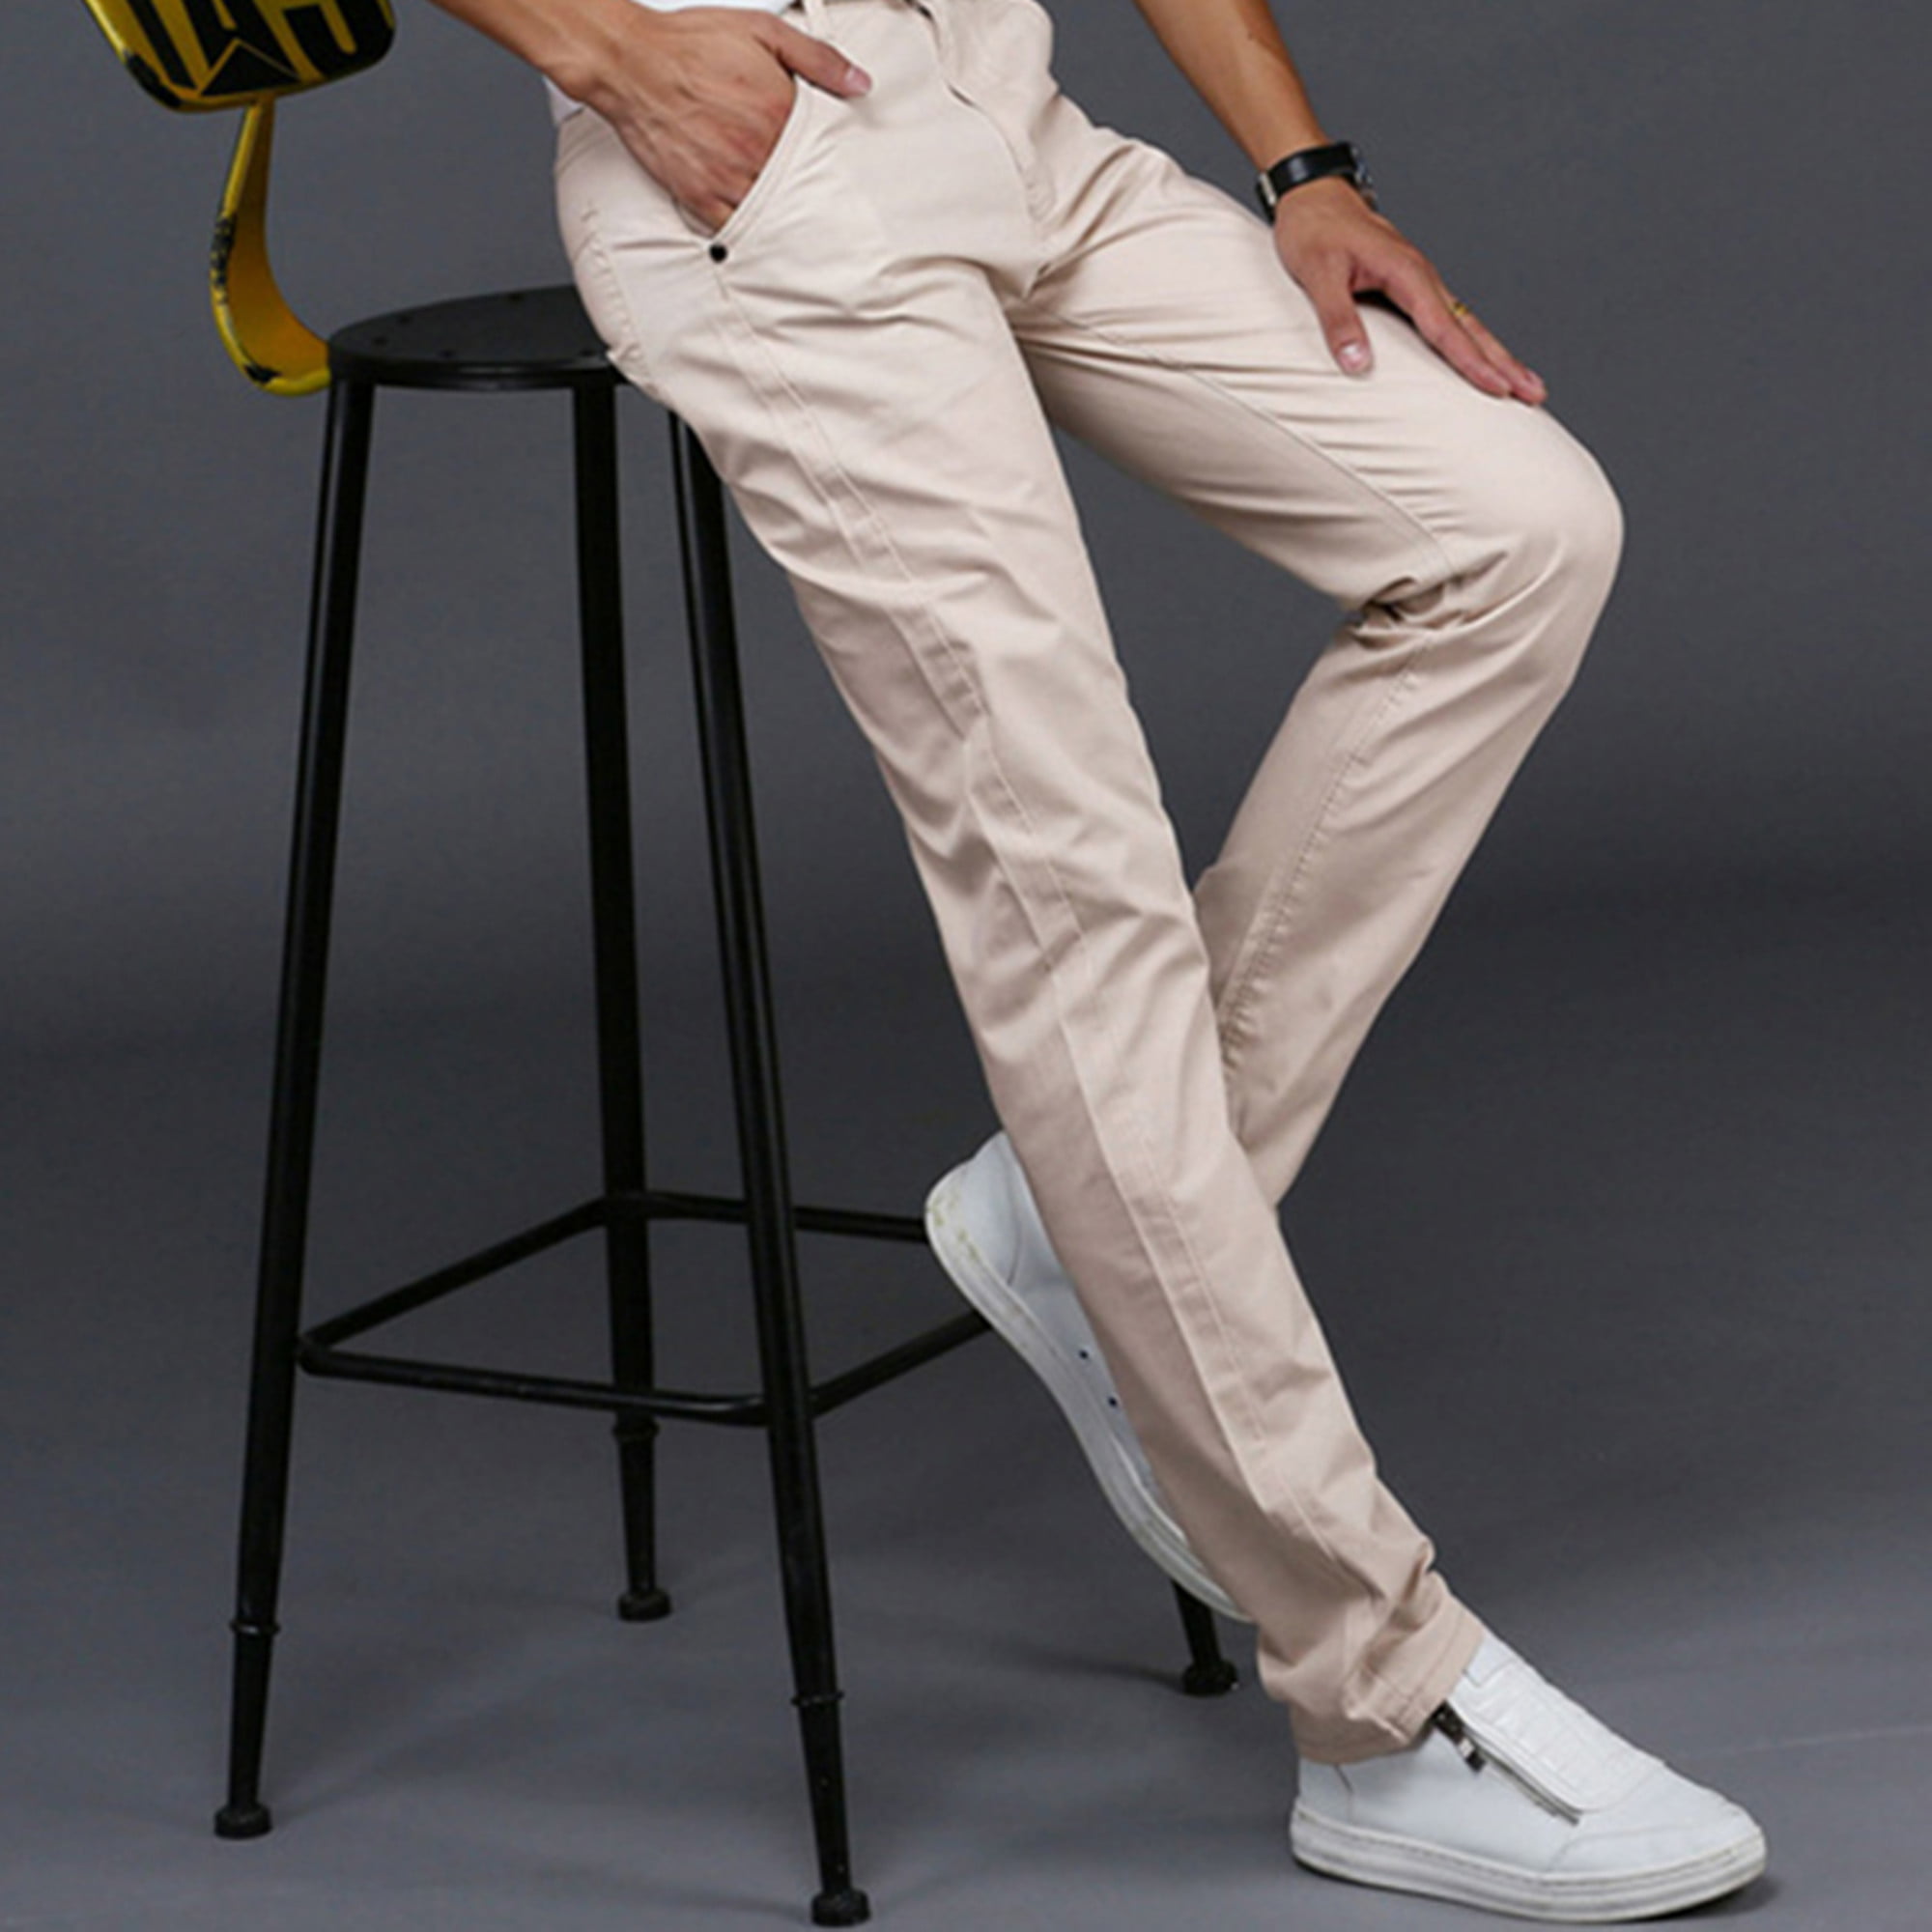 Mens Cargo Chino Pencil Solid Trousers Formal Straight Leg Party Business Pants